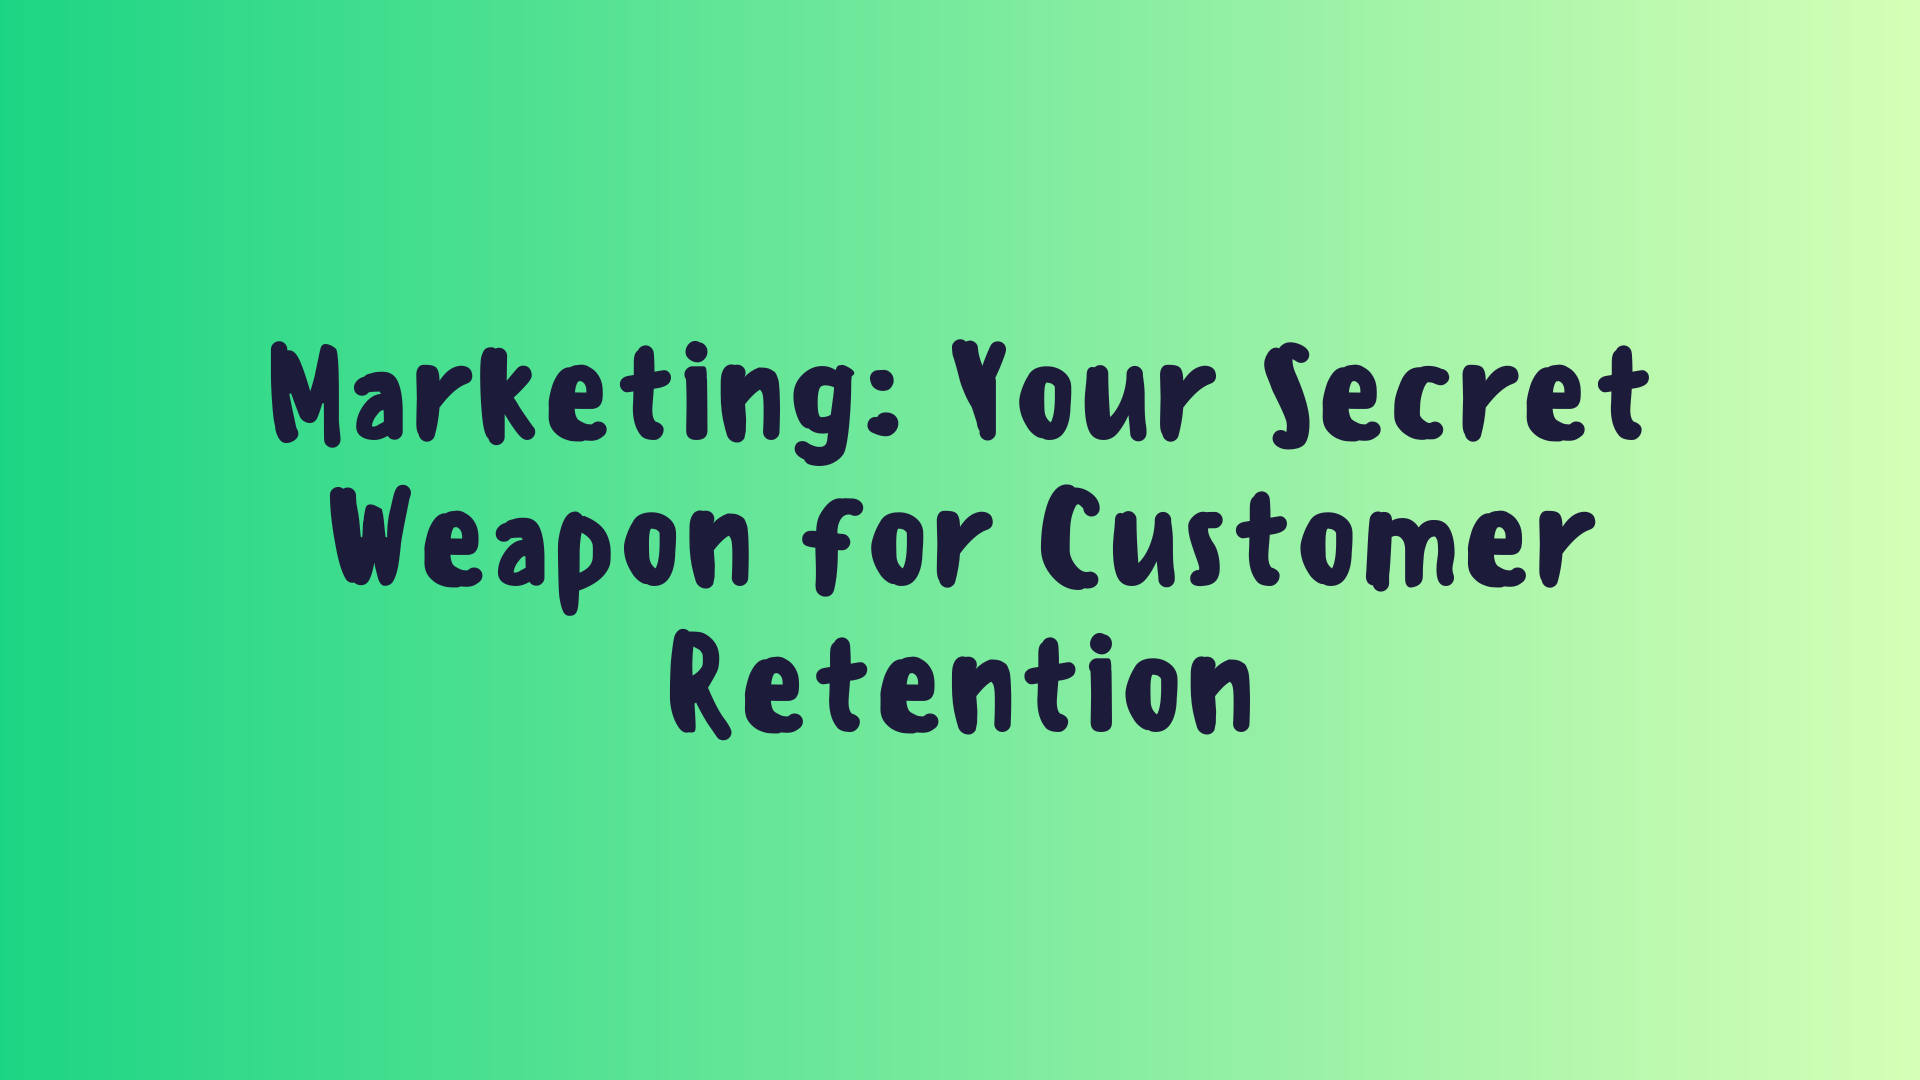 Marketing: Your Secret Weapon for Customer Retention